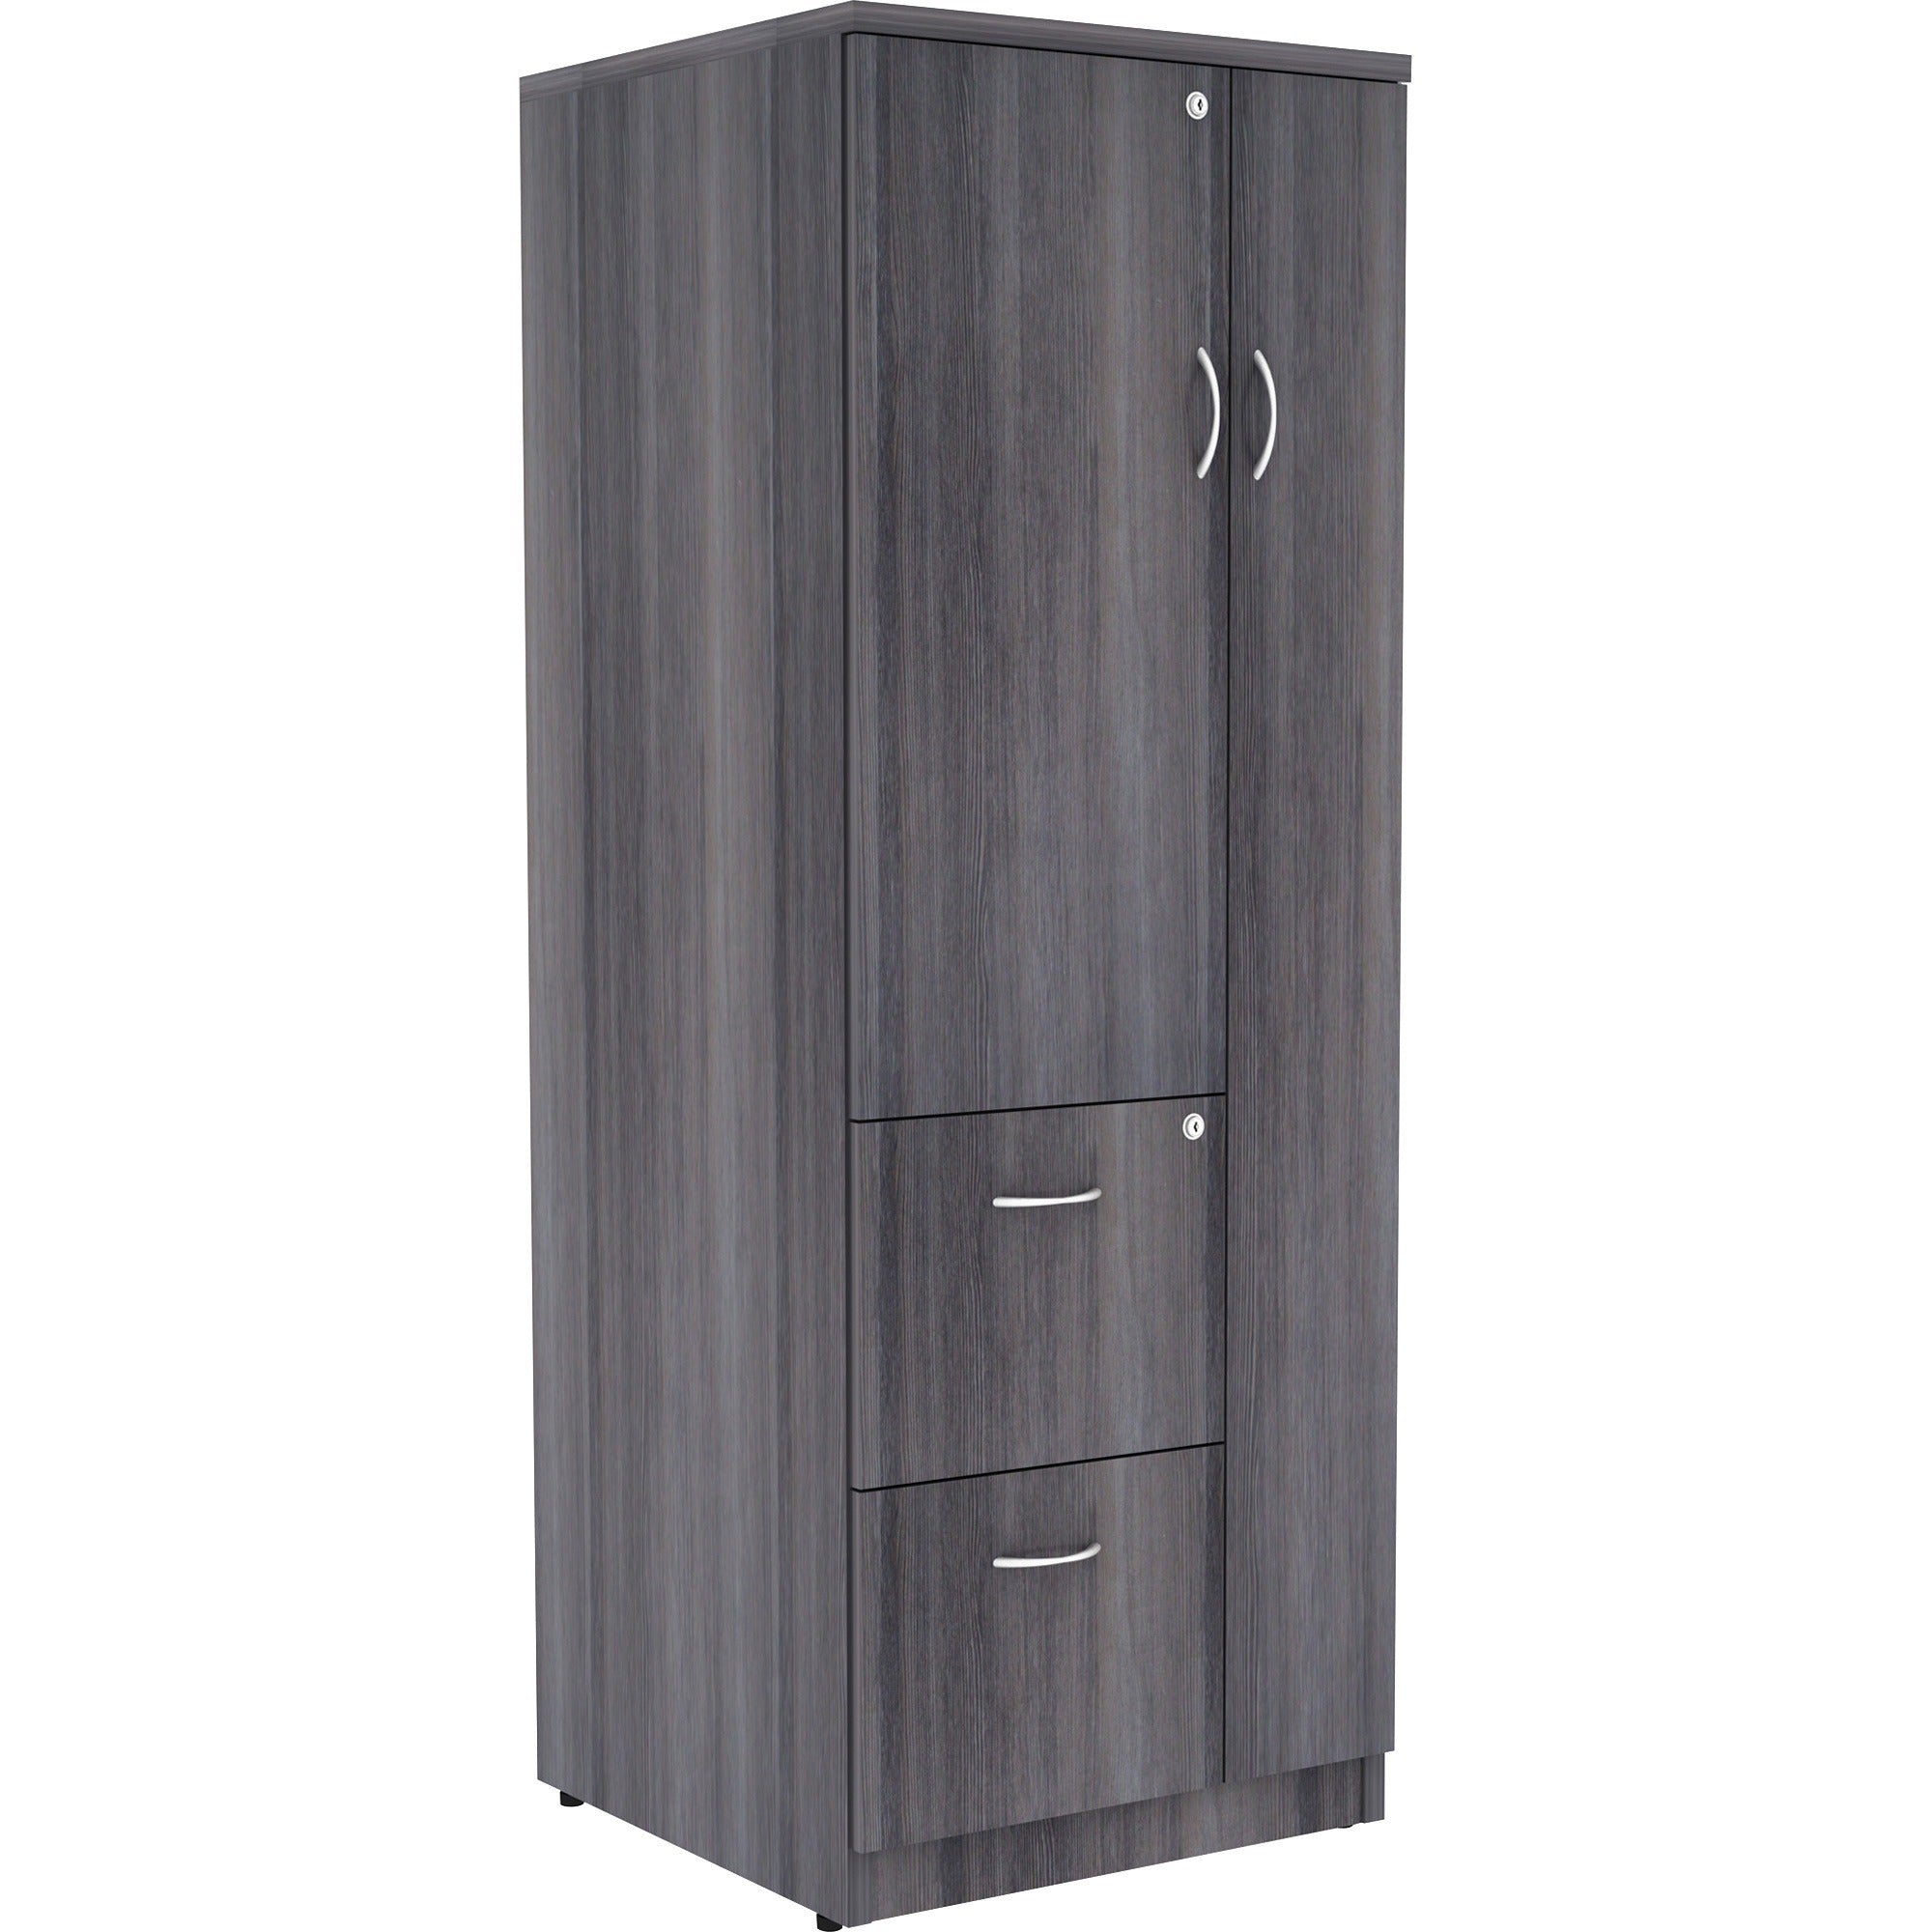 lorell-essentials-revelance-tall-storage-cabinet-236-x-236656-2-drawers-2-shelves-material-medium-density-fiberboard-mdf-particleboard-finish-weathered-charcoal-abrasion-resistant_llr69659 - 1